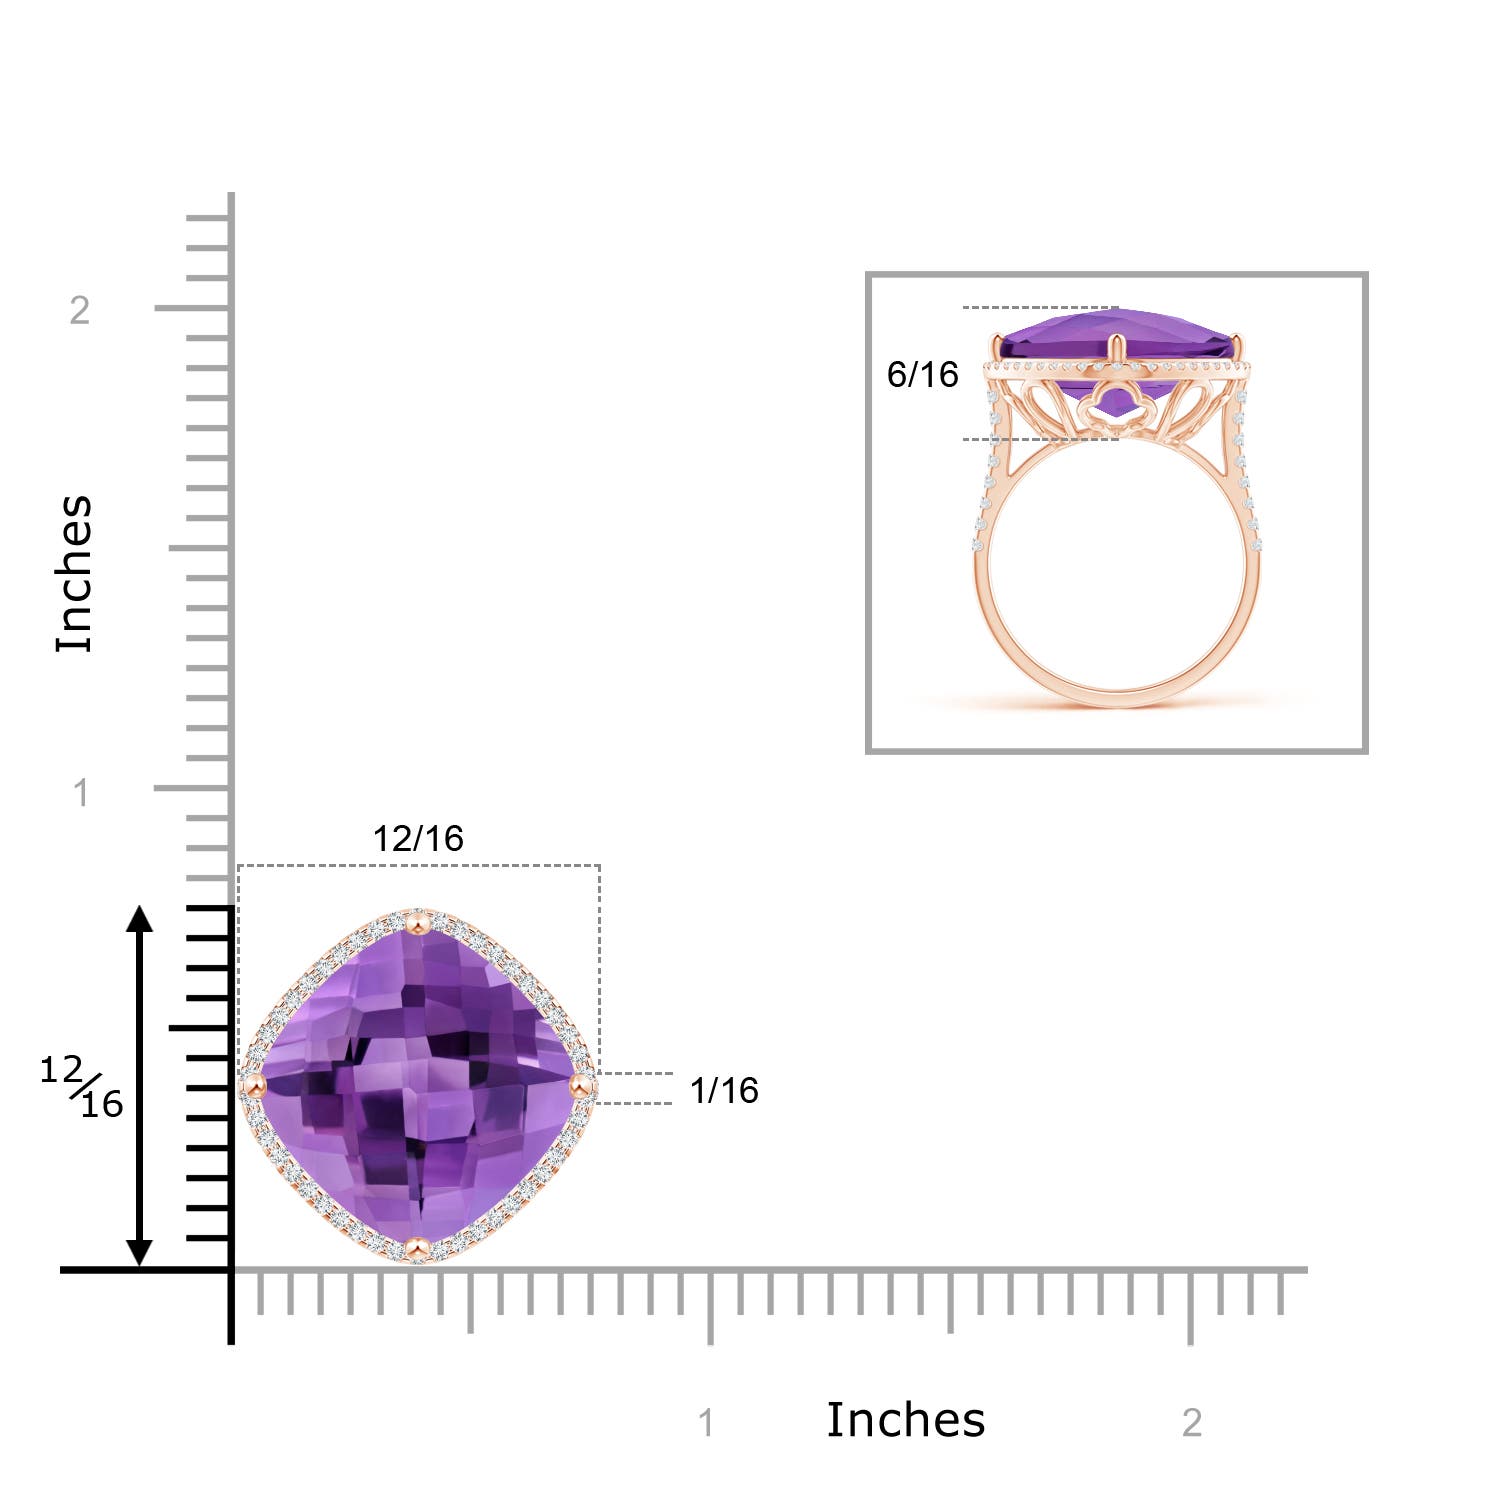 AA - Amethyst / 13.89 CT / 14 KT Rose Gold